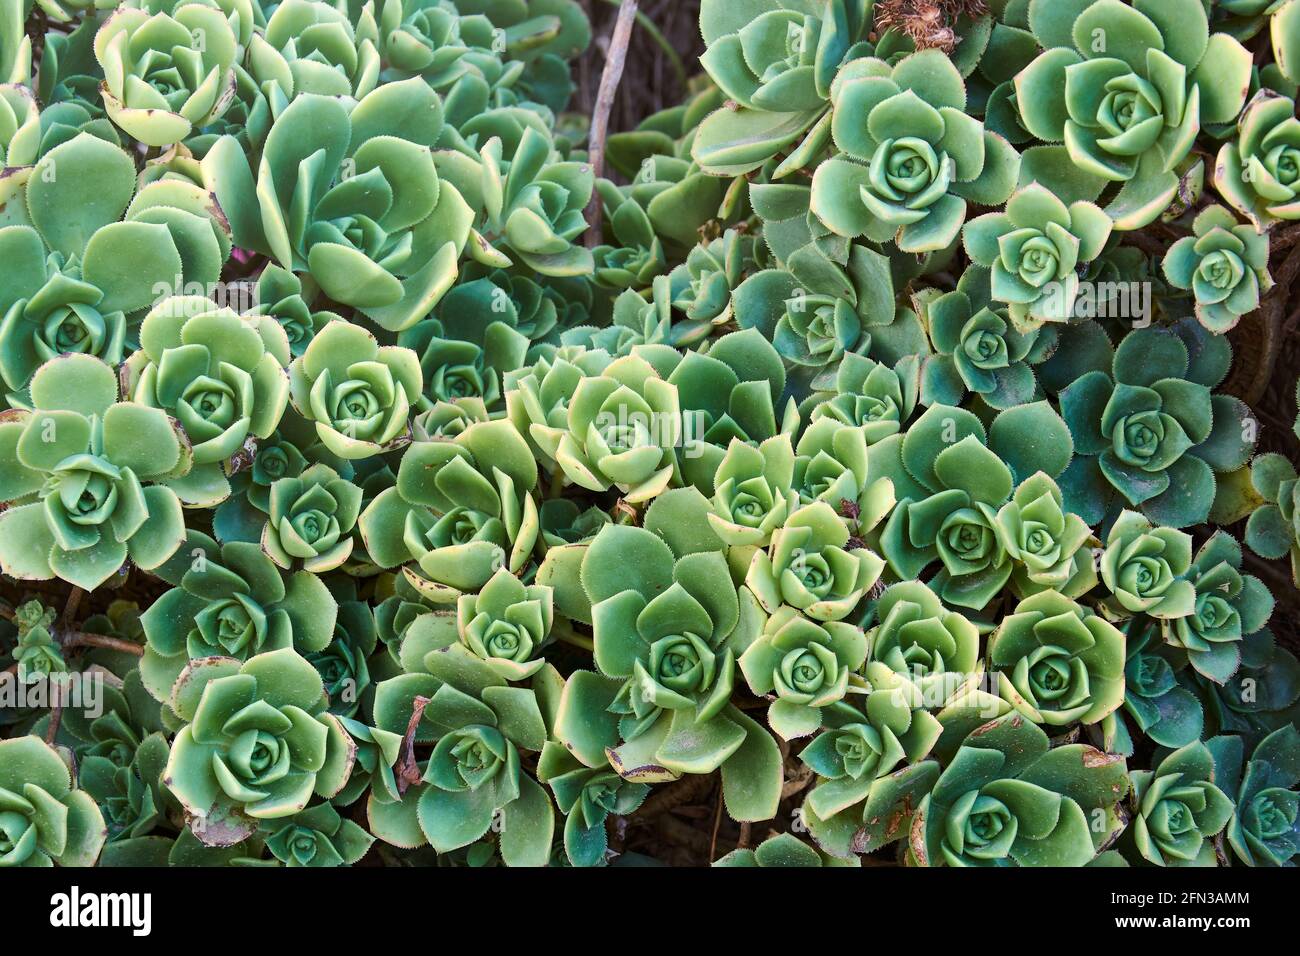 Background of big succulent echeveria plant growing free in garden of house, group of leaves forming abstract pattern. Top view. Stock Photo